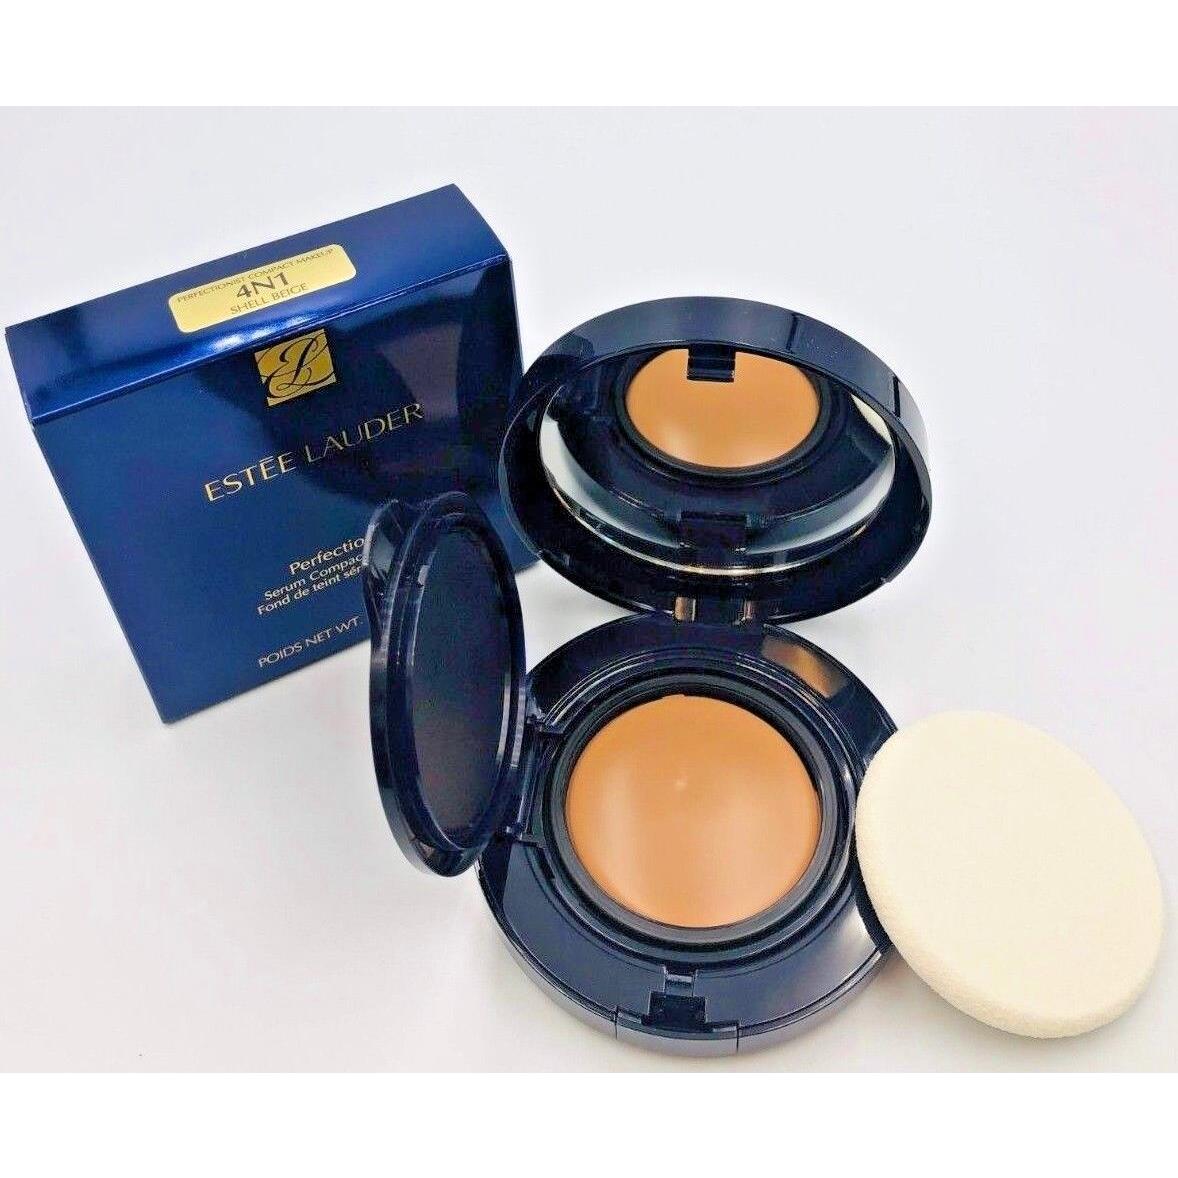 Estee Lauder Perfectionist Serum Compact Makeup 4N1 Shell Beige .35 oz Boxed